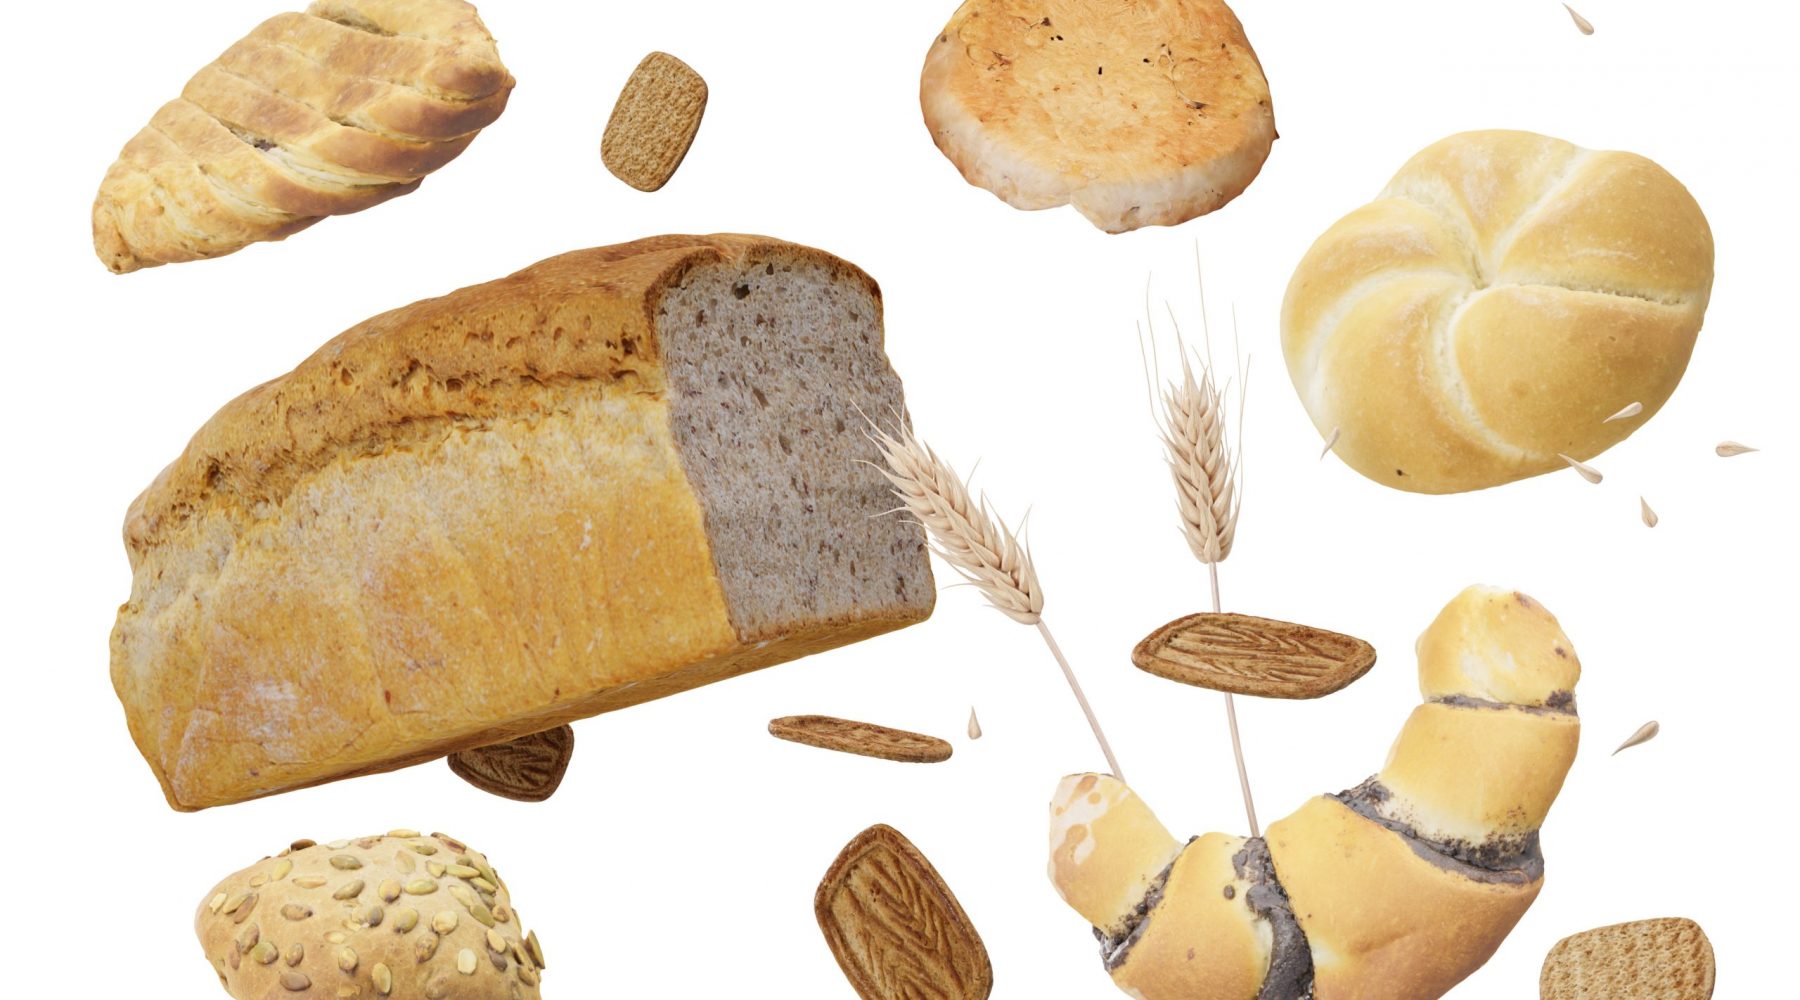 Wheat ears, bread, pastries isolated on white background. Celiac disease and gluten intolerance concept. Healthcare, healthy eating, healthy lifestyle, gluten free diet. 3D rendering